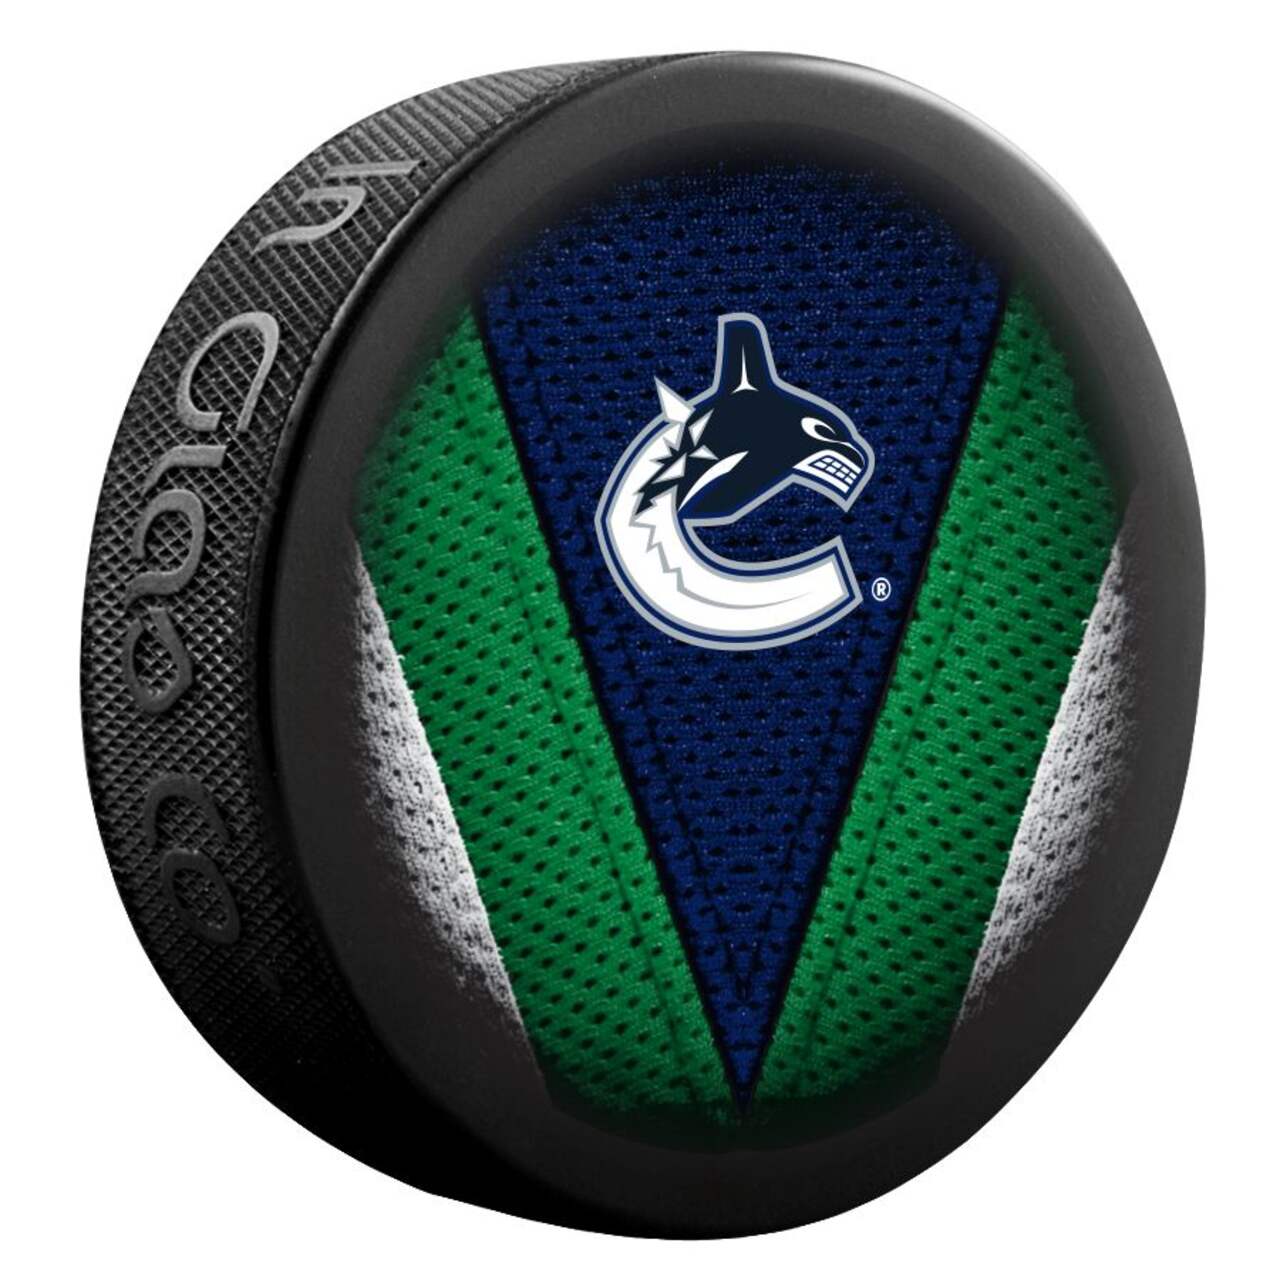 https://media-www.canadiantire.ca/product/playing/hockey/hockey-accessories/0830118/vancouver-canucks-replica-hockey-puck-cb107431-43d4-46a7-937f-b4ed8650ab4f-jpgrendition.jpg?imdensity=1&imwidth=640&impolicy=mZoom